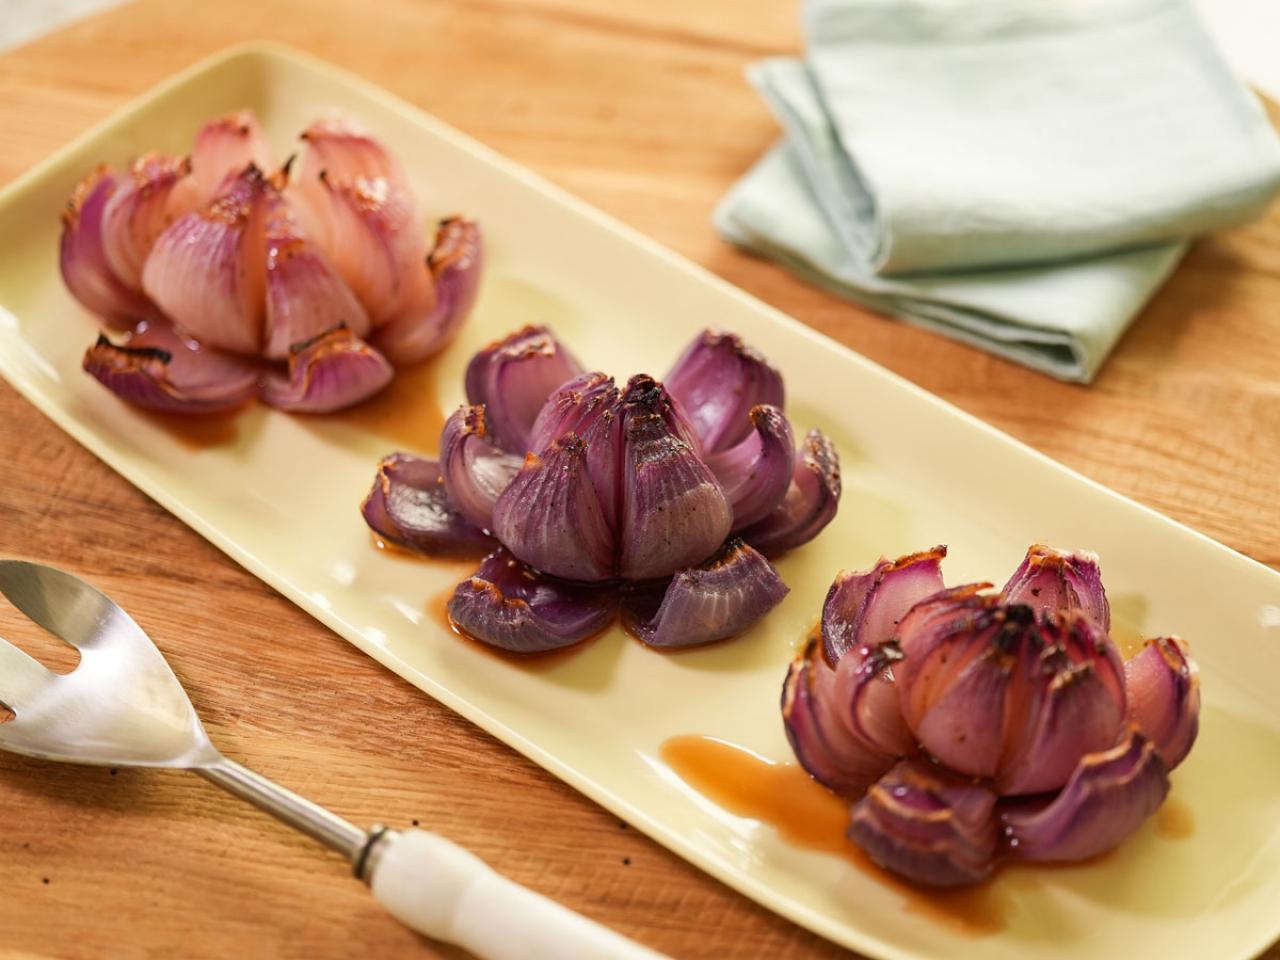 https://food.fnr.sndimg.com/content/dam/images/food/fullset/2021/09/10/KC2907_Sweet-And-Sour-Flowering-Red-Onions_s4x3.jpg.rend.hgtvcom.1280.960.suffix/1631292452194.jpeg